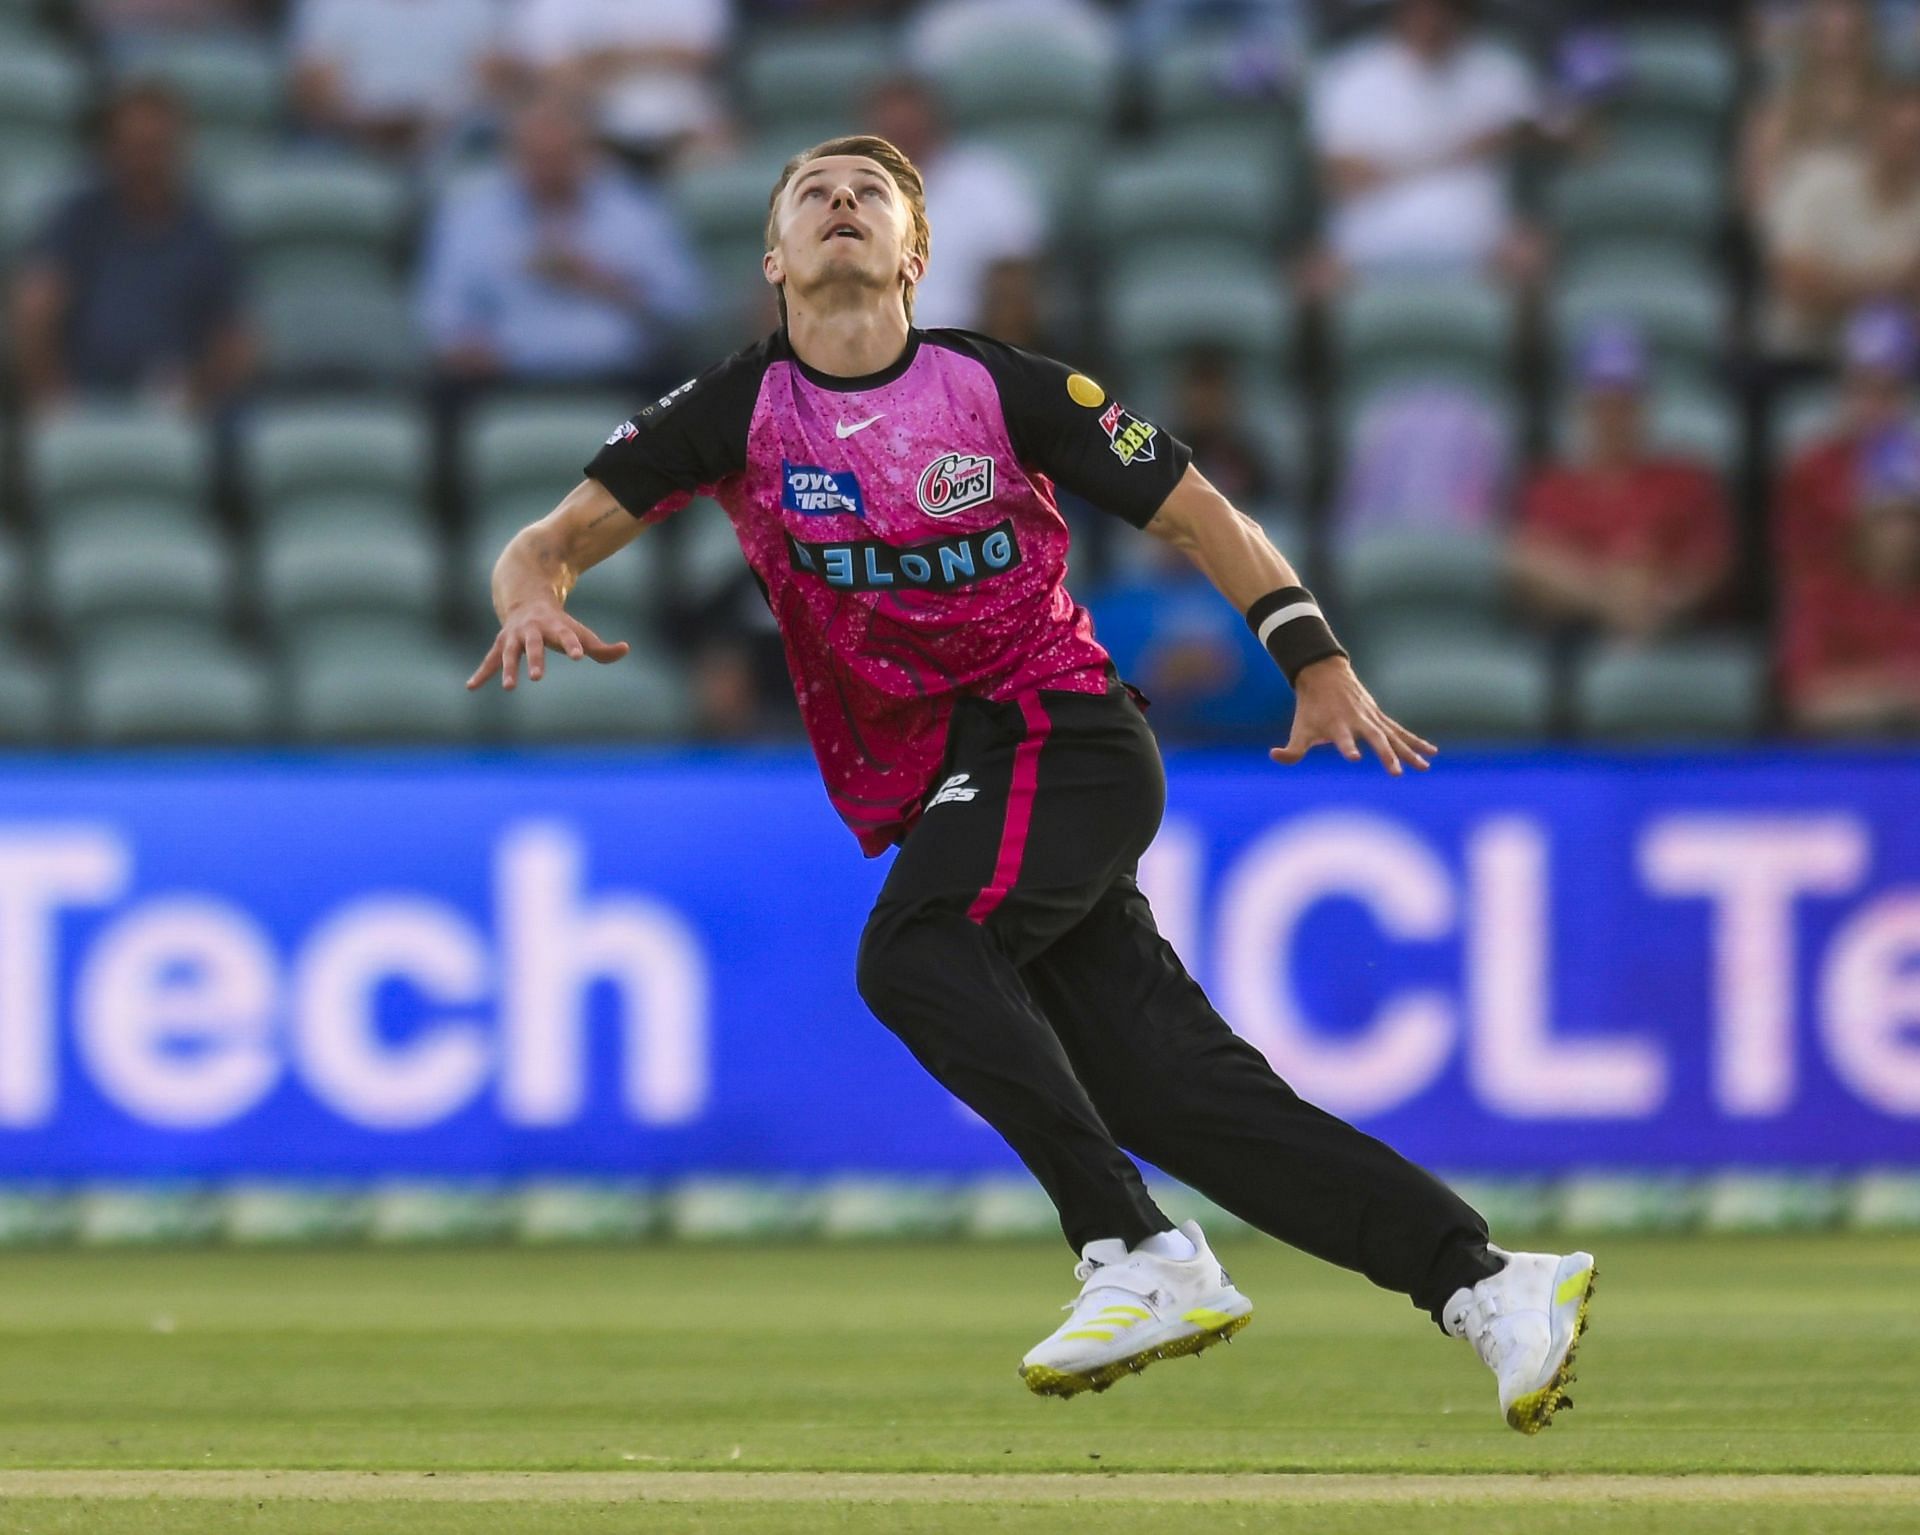 Tom Curran did not feature in the IPL in the last two seasons